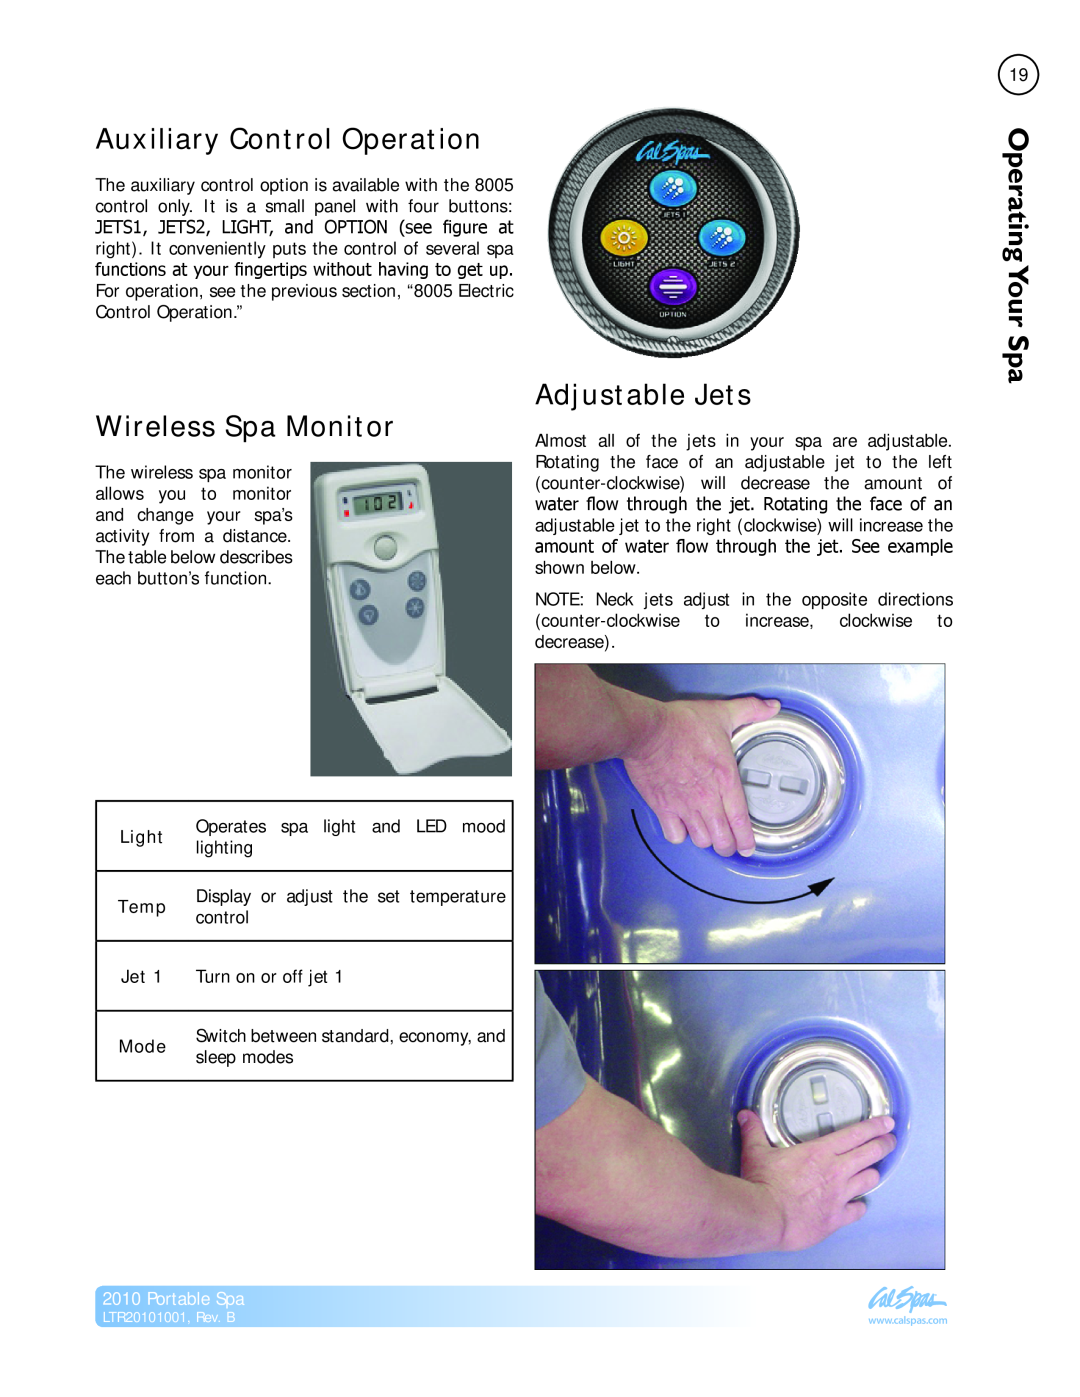 Cal Spas LTR20101001 manual Auxiliary Control Operation, Wireless Spa Monitor, Adjustable Jets, Portable Spa 